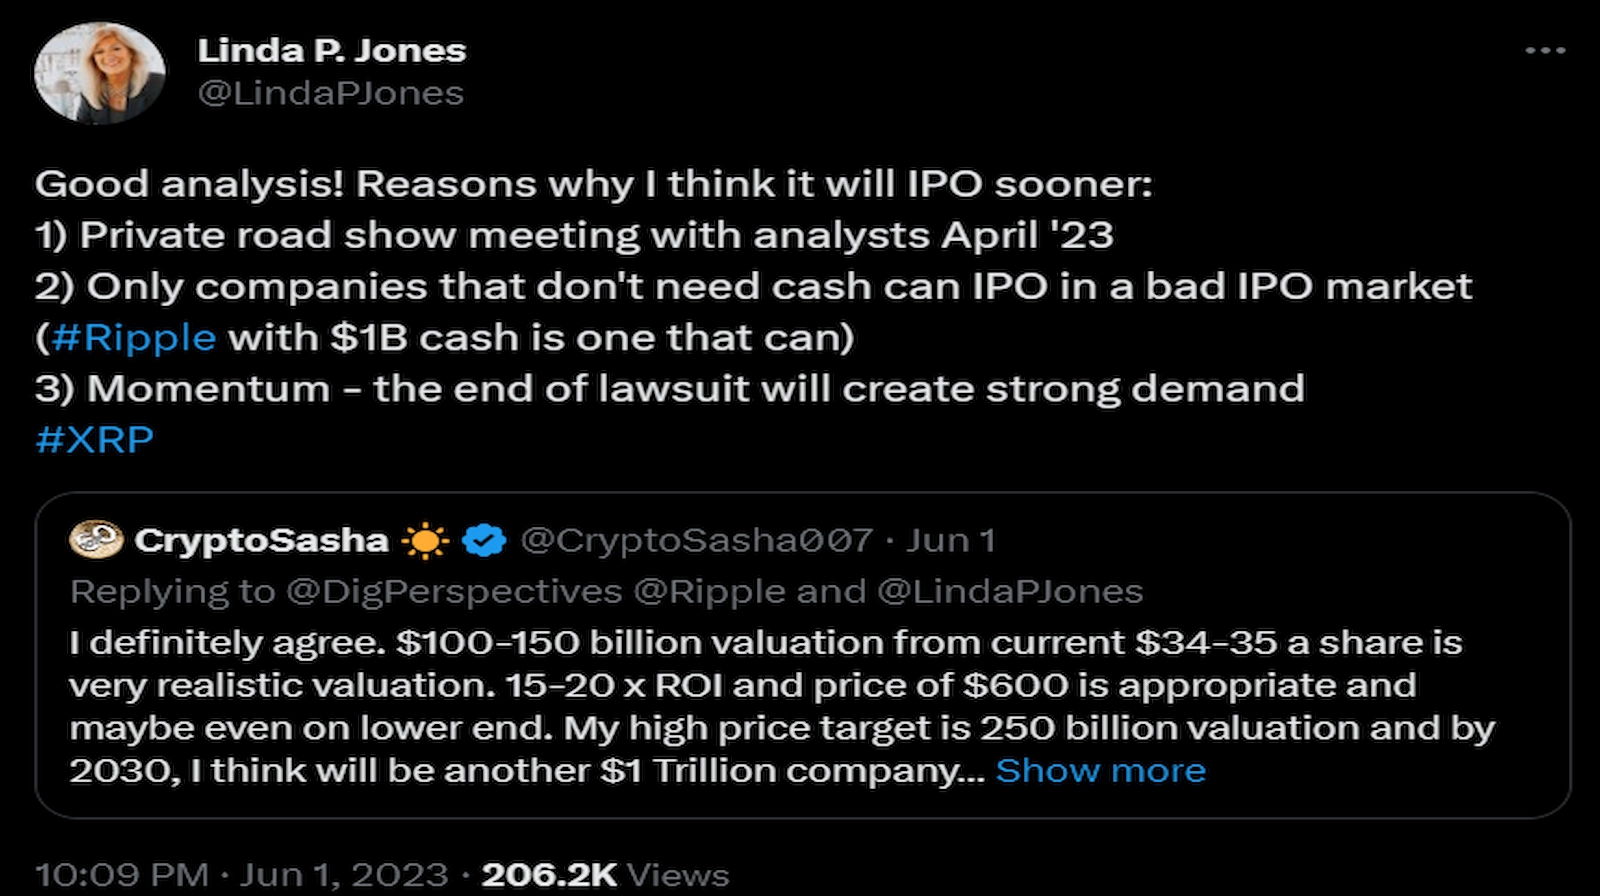 Linda P. Jones listed different reasons for the possibility of a Ripple Labs IPO